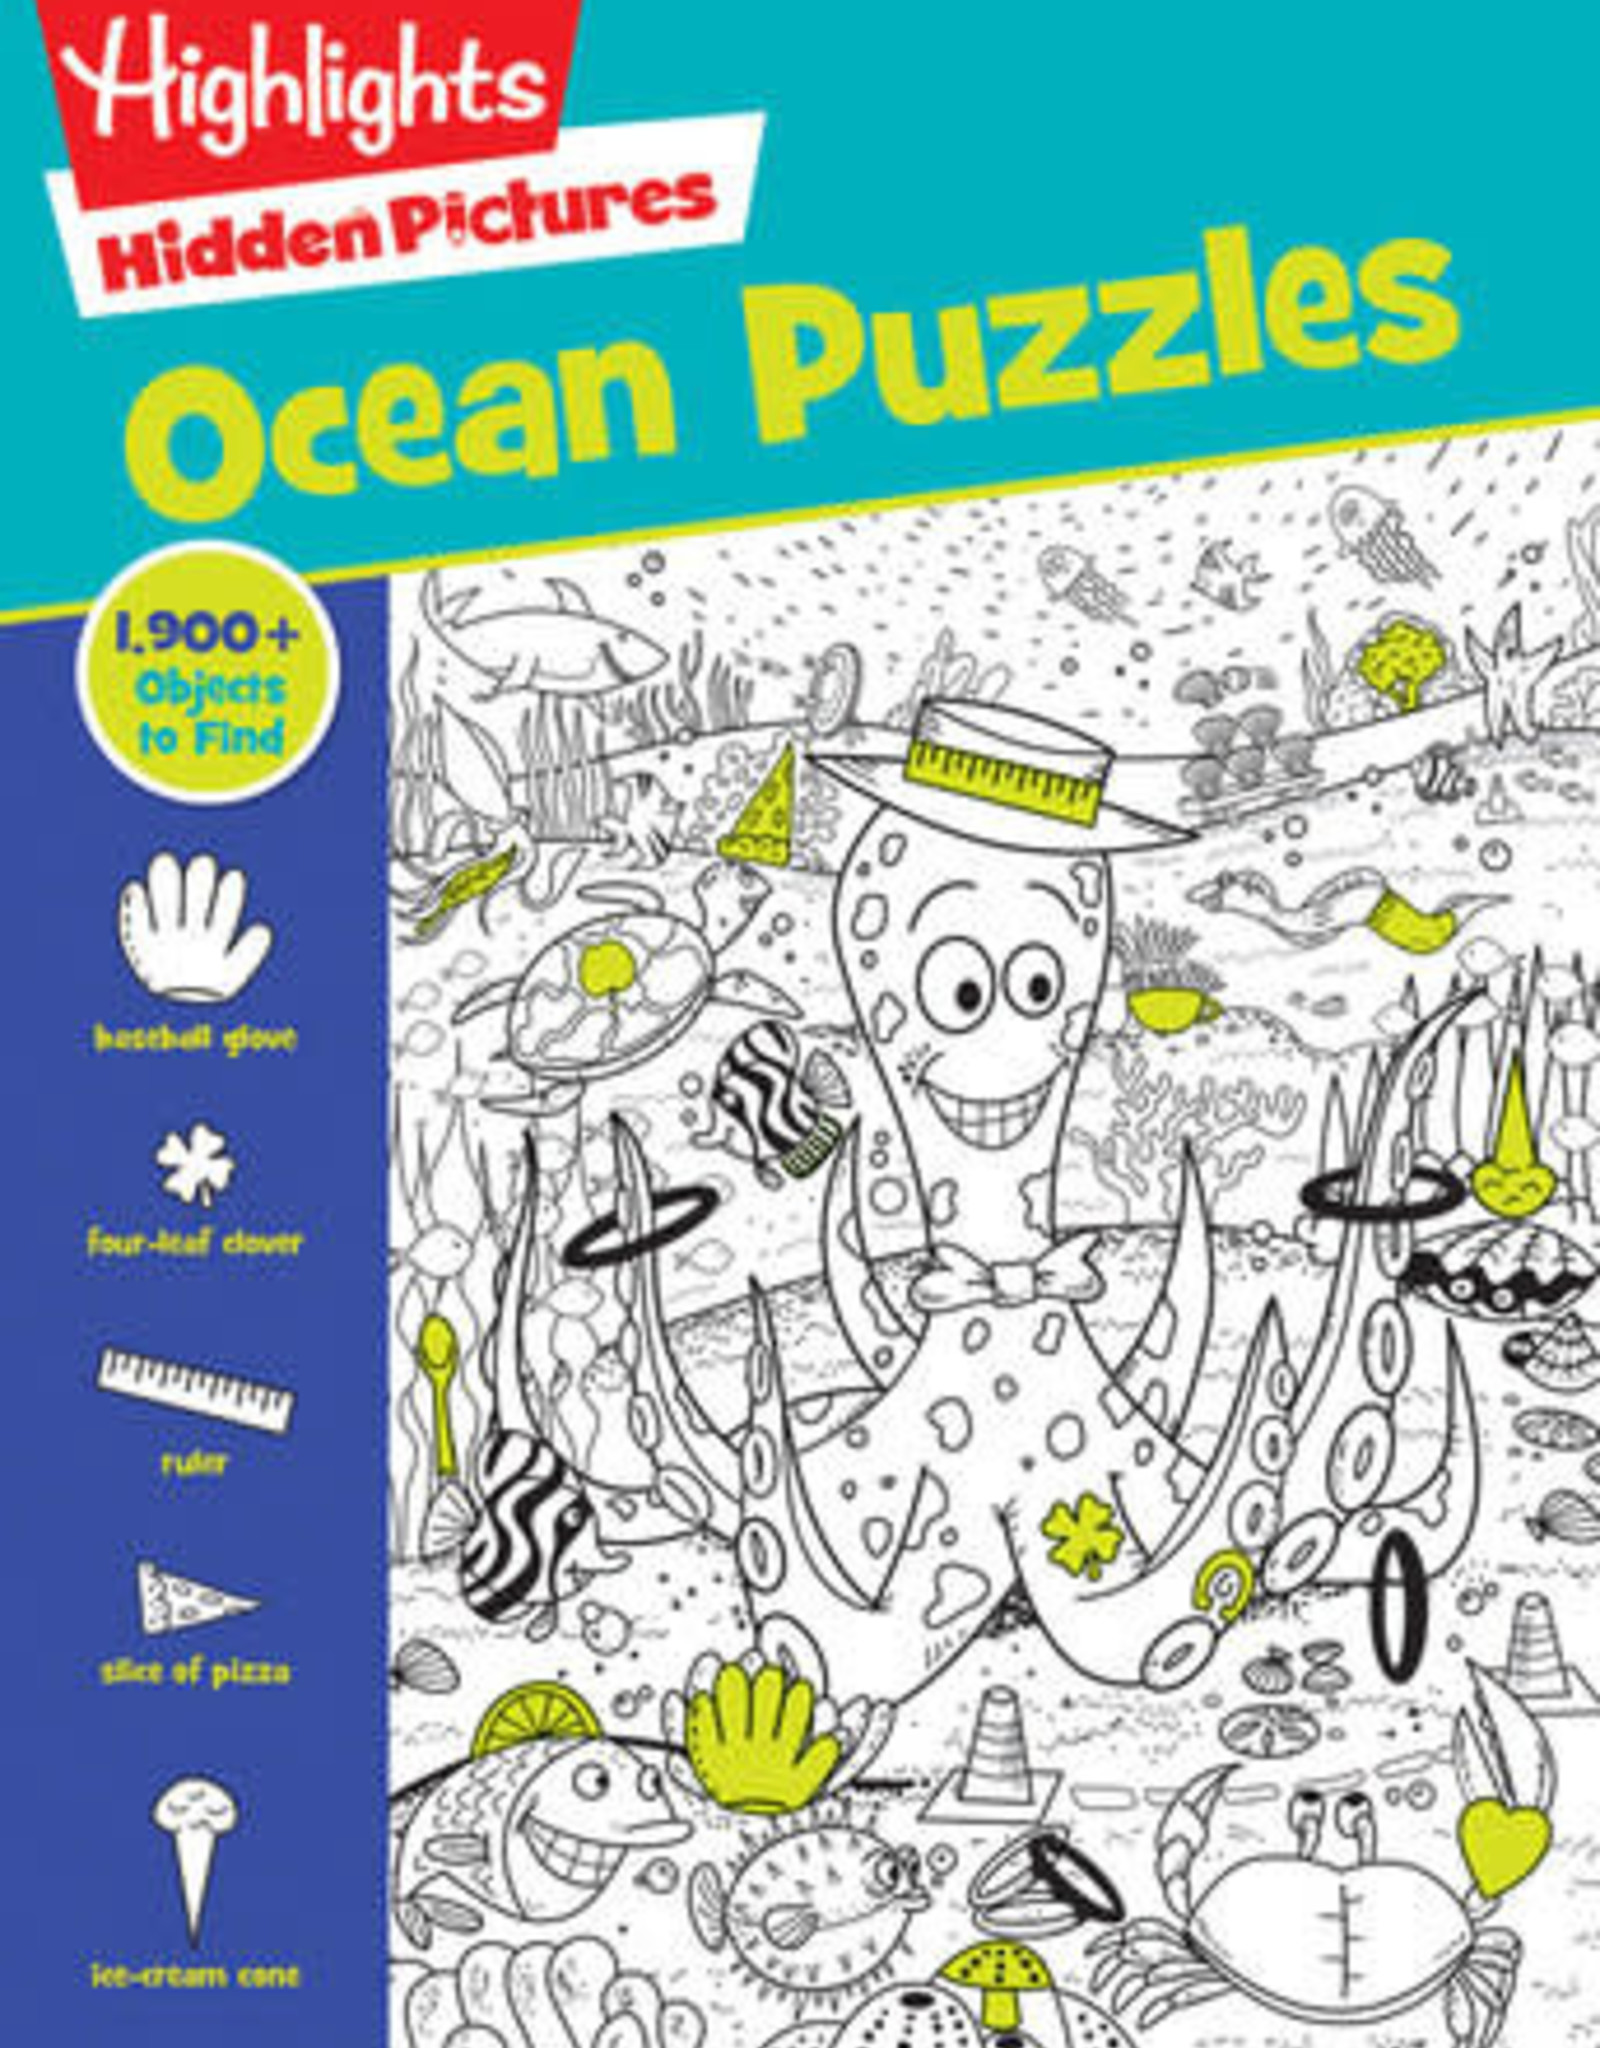 Highlights Ocean Puzzles